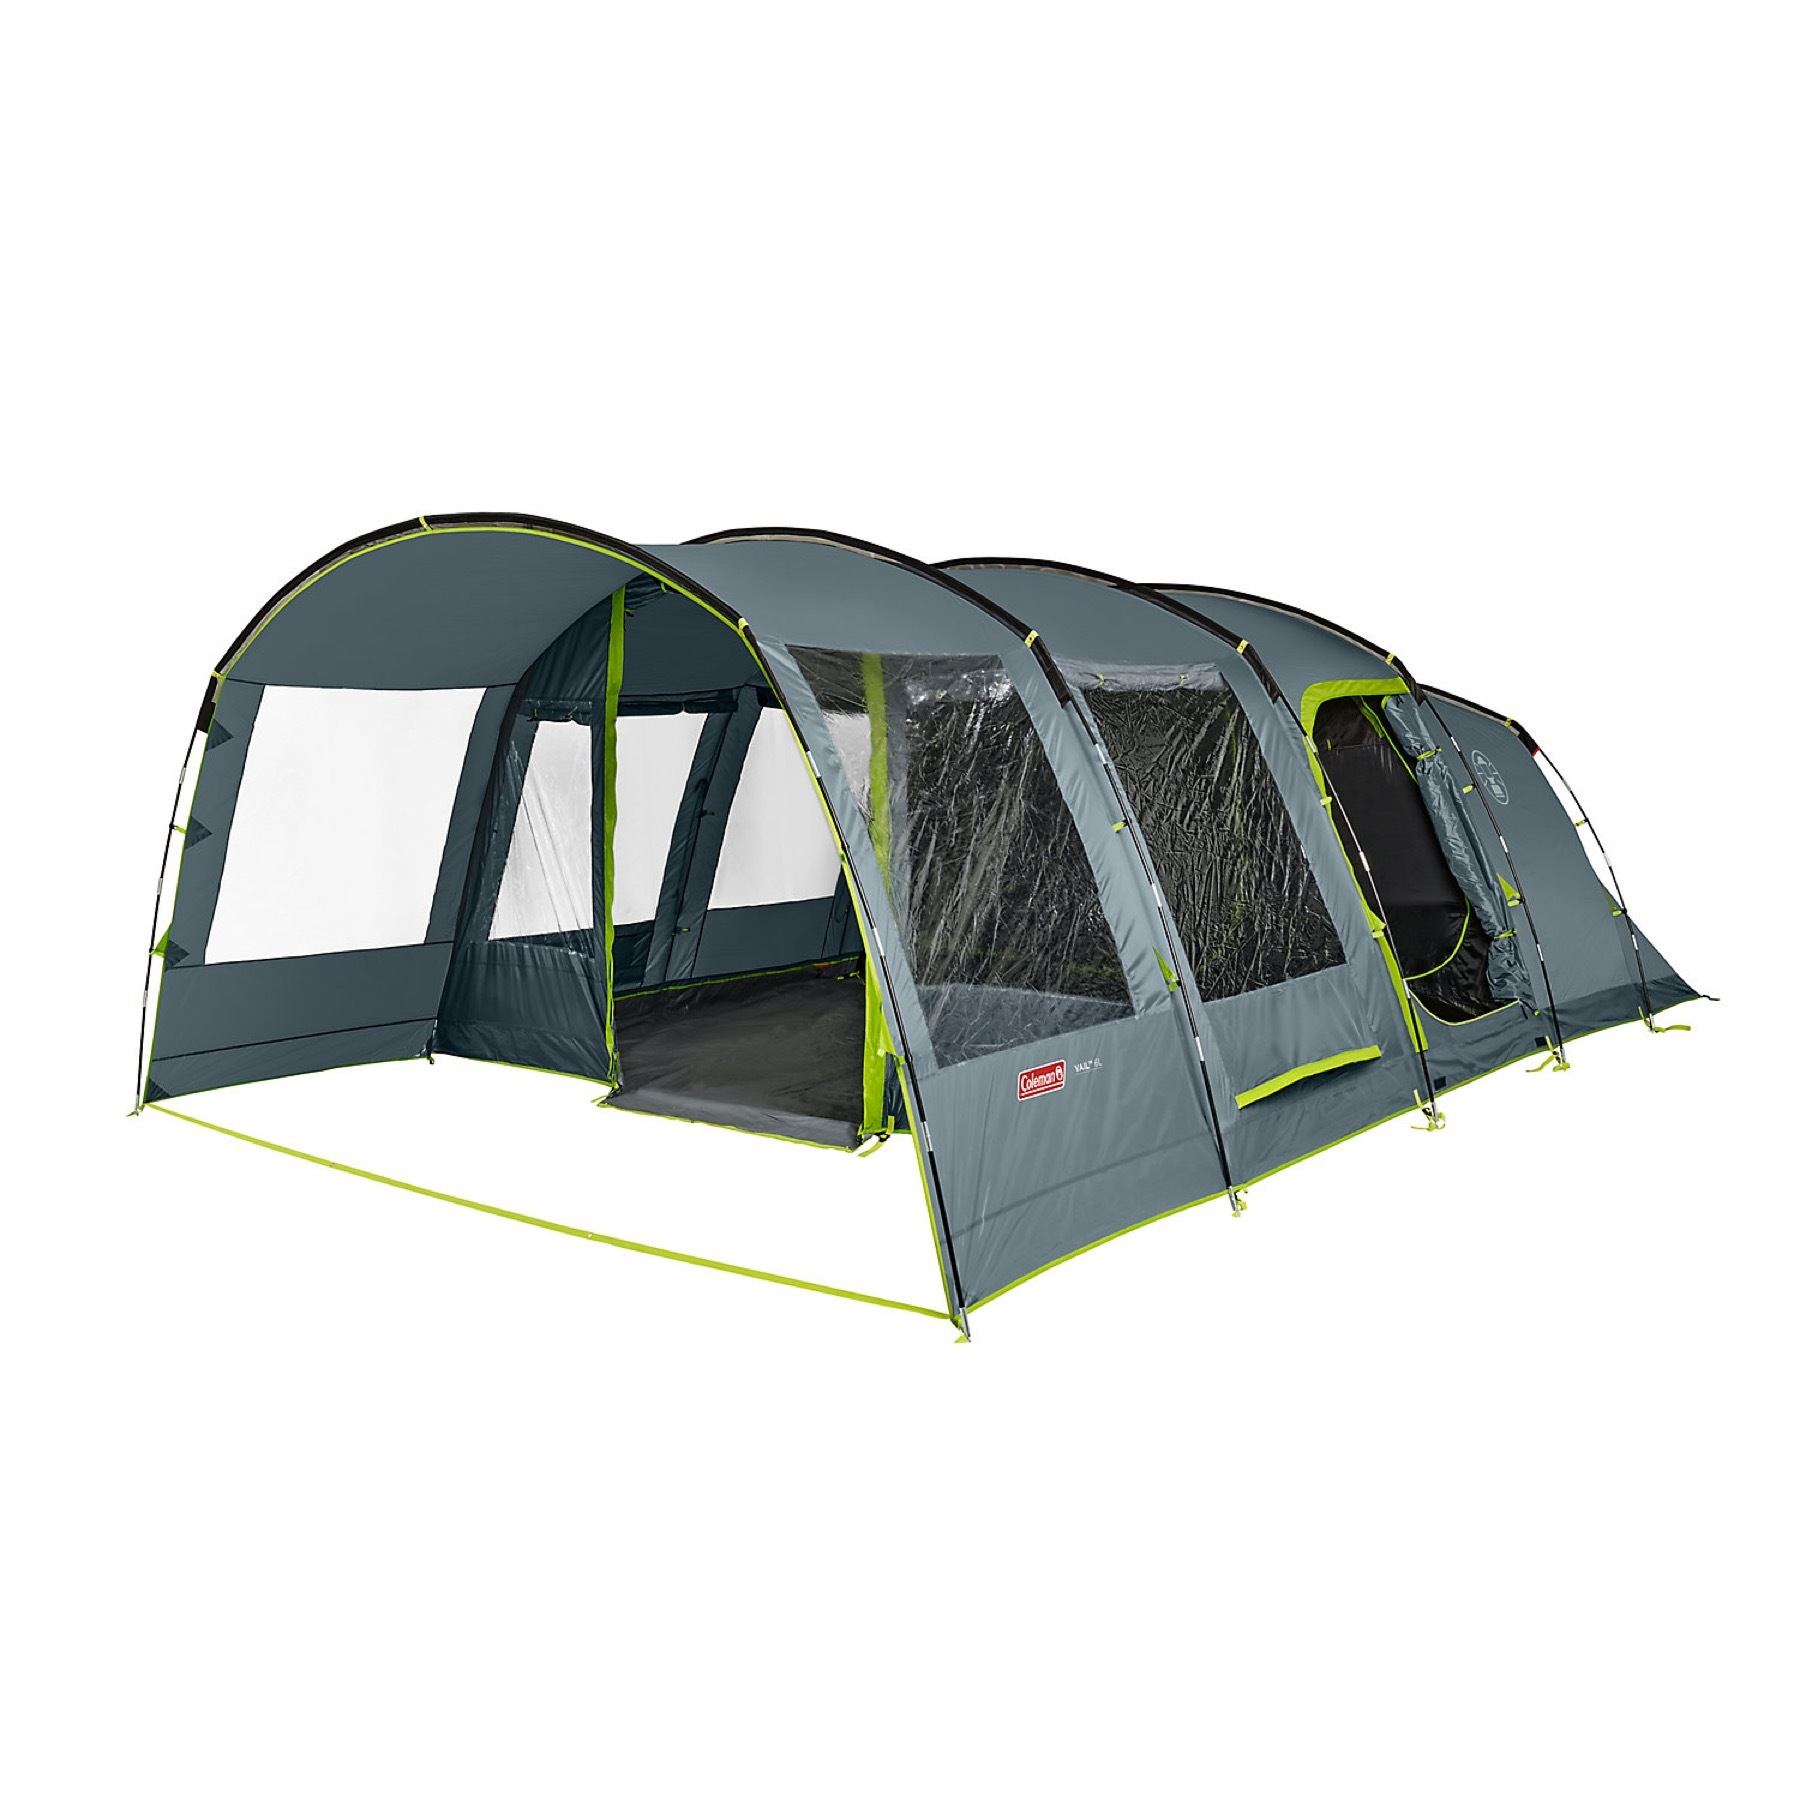 The Coleman Vale 6L Family Tent